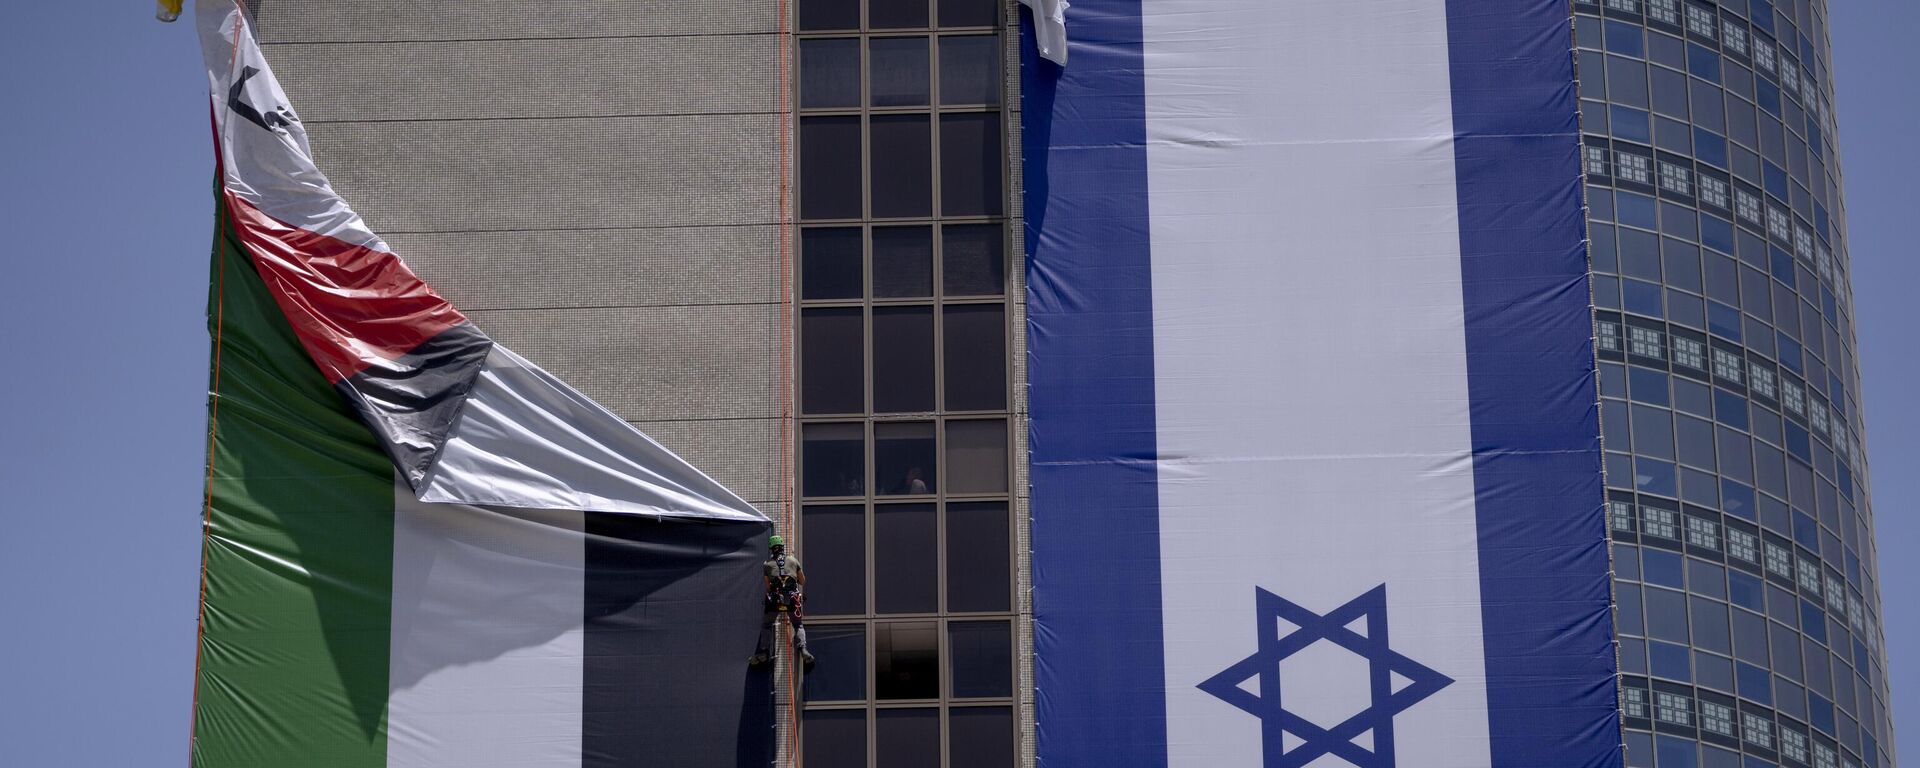 A Palestinian flag is removed from a building by Israeli authorities after being put up by an advocacy group that promotes coexistence between Palestinians and Israelis, in Ramat Gan, Israel, Wednesday, June 1, 2022 - Sputnik International, 1920, 04.03.2024